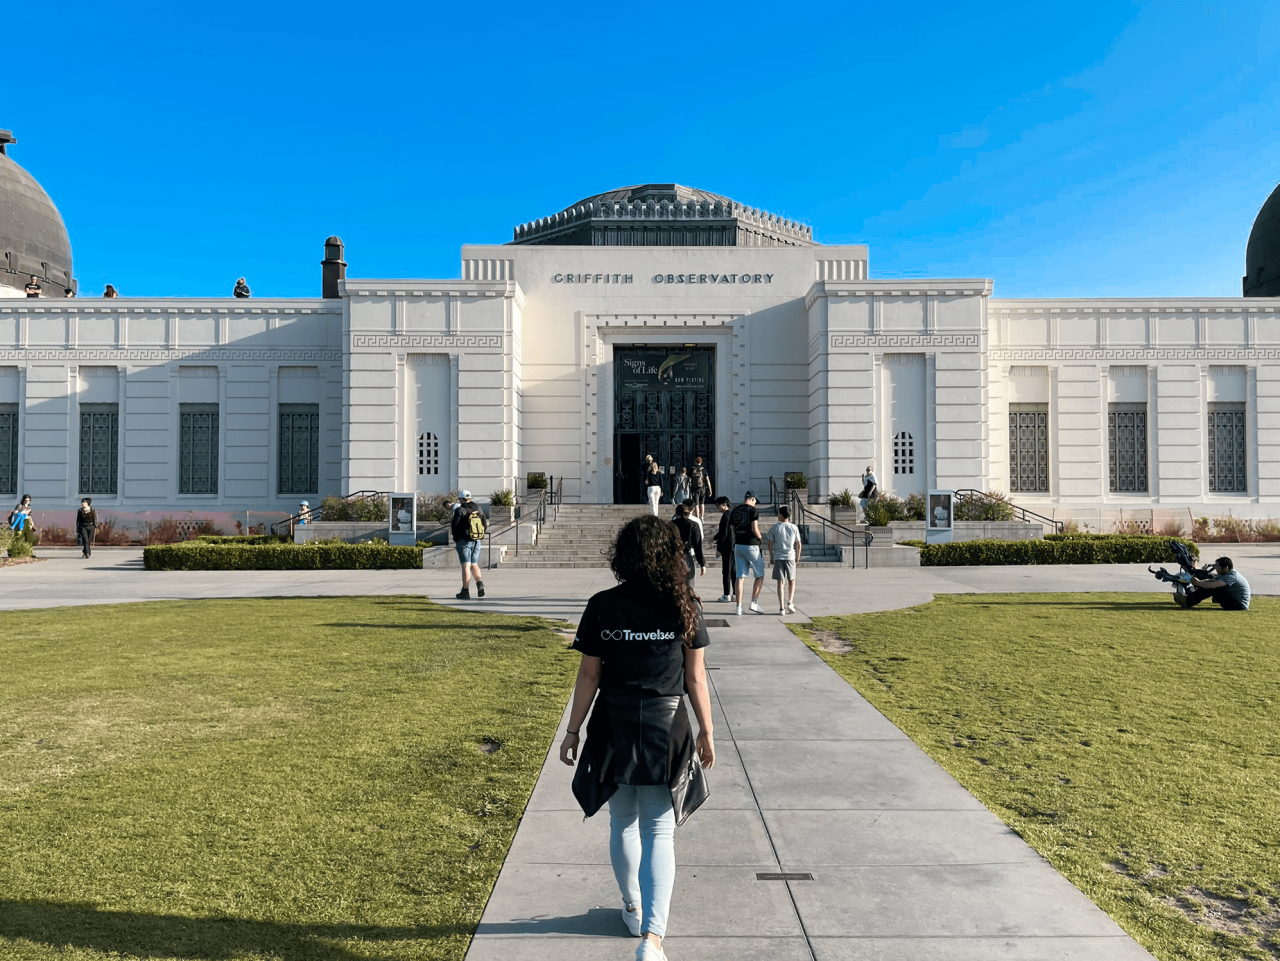 la griffith observatory 2